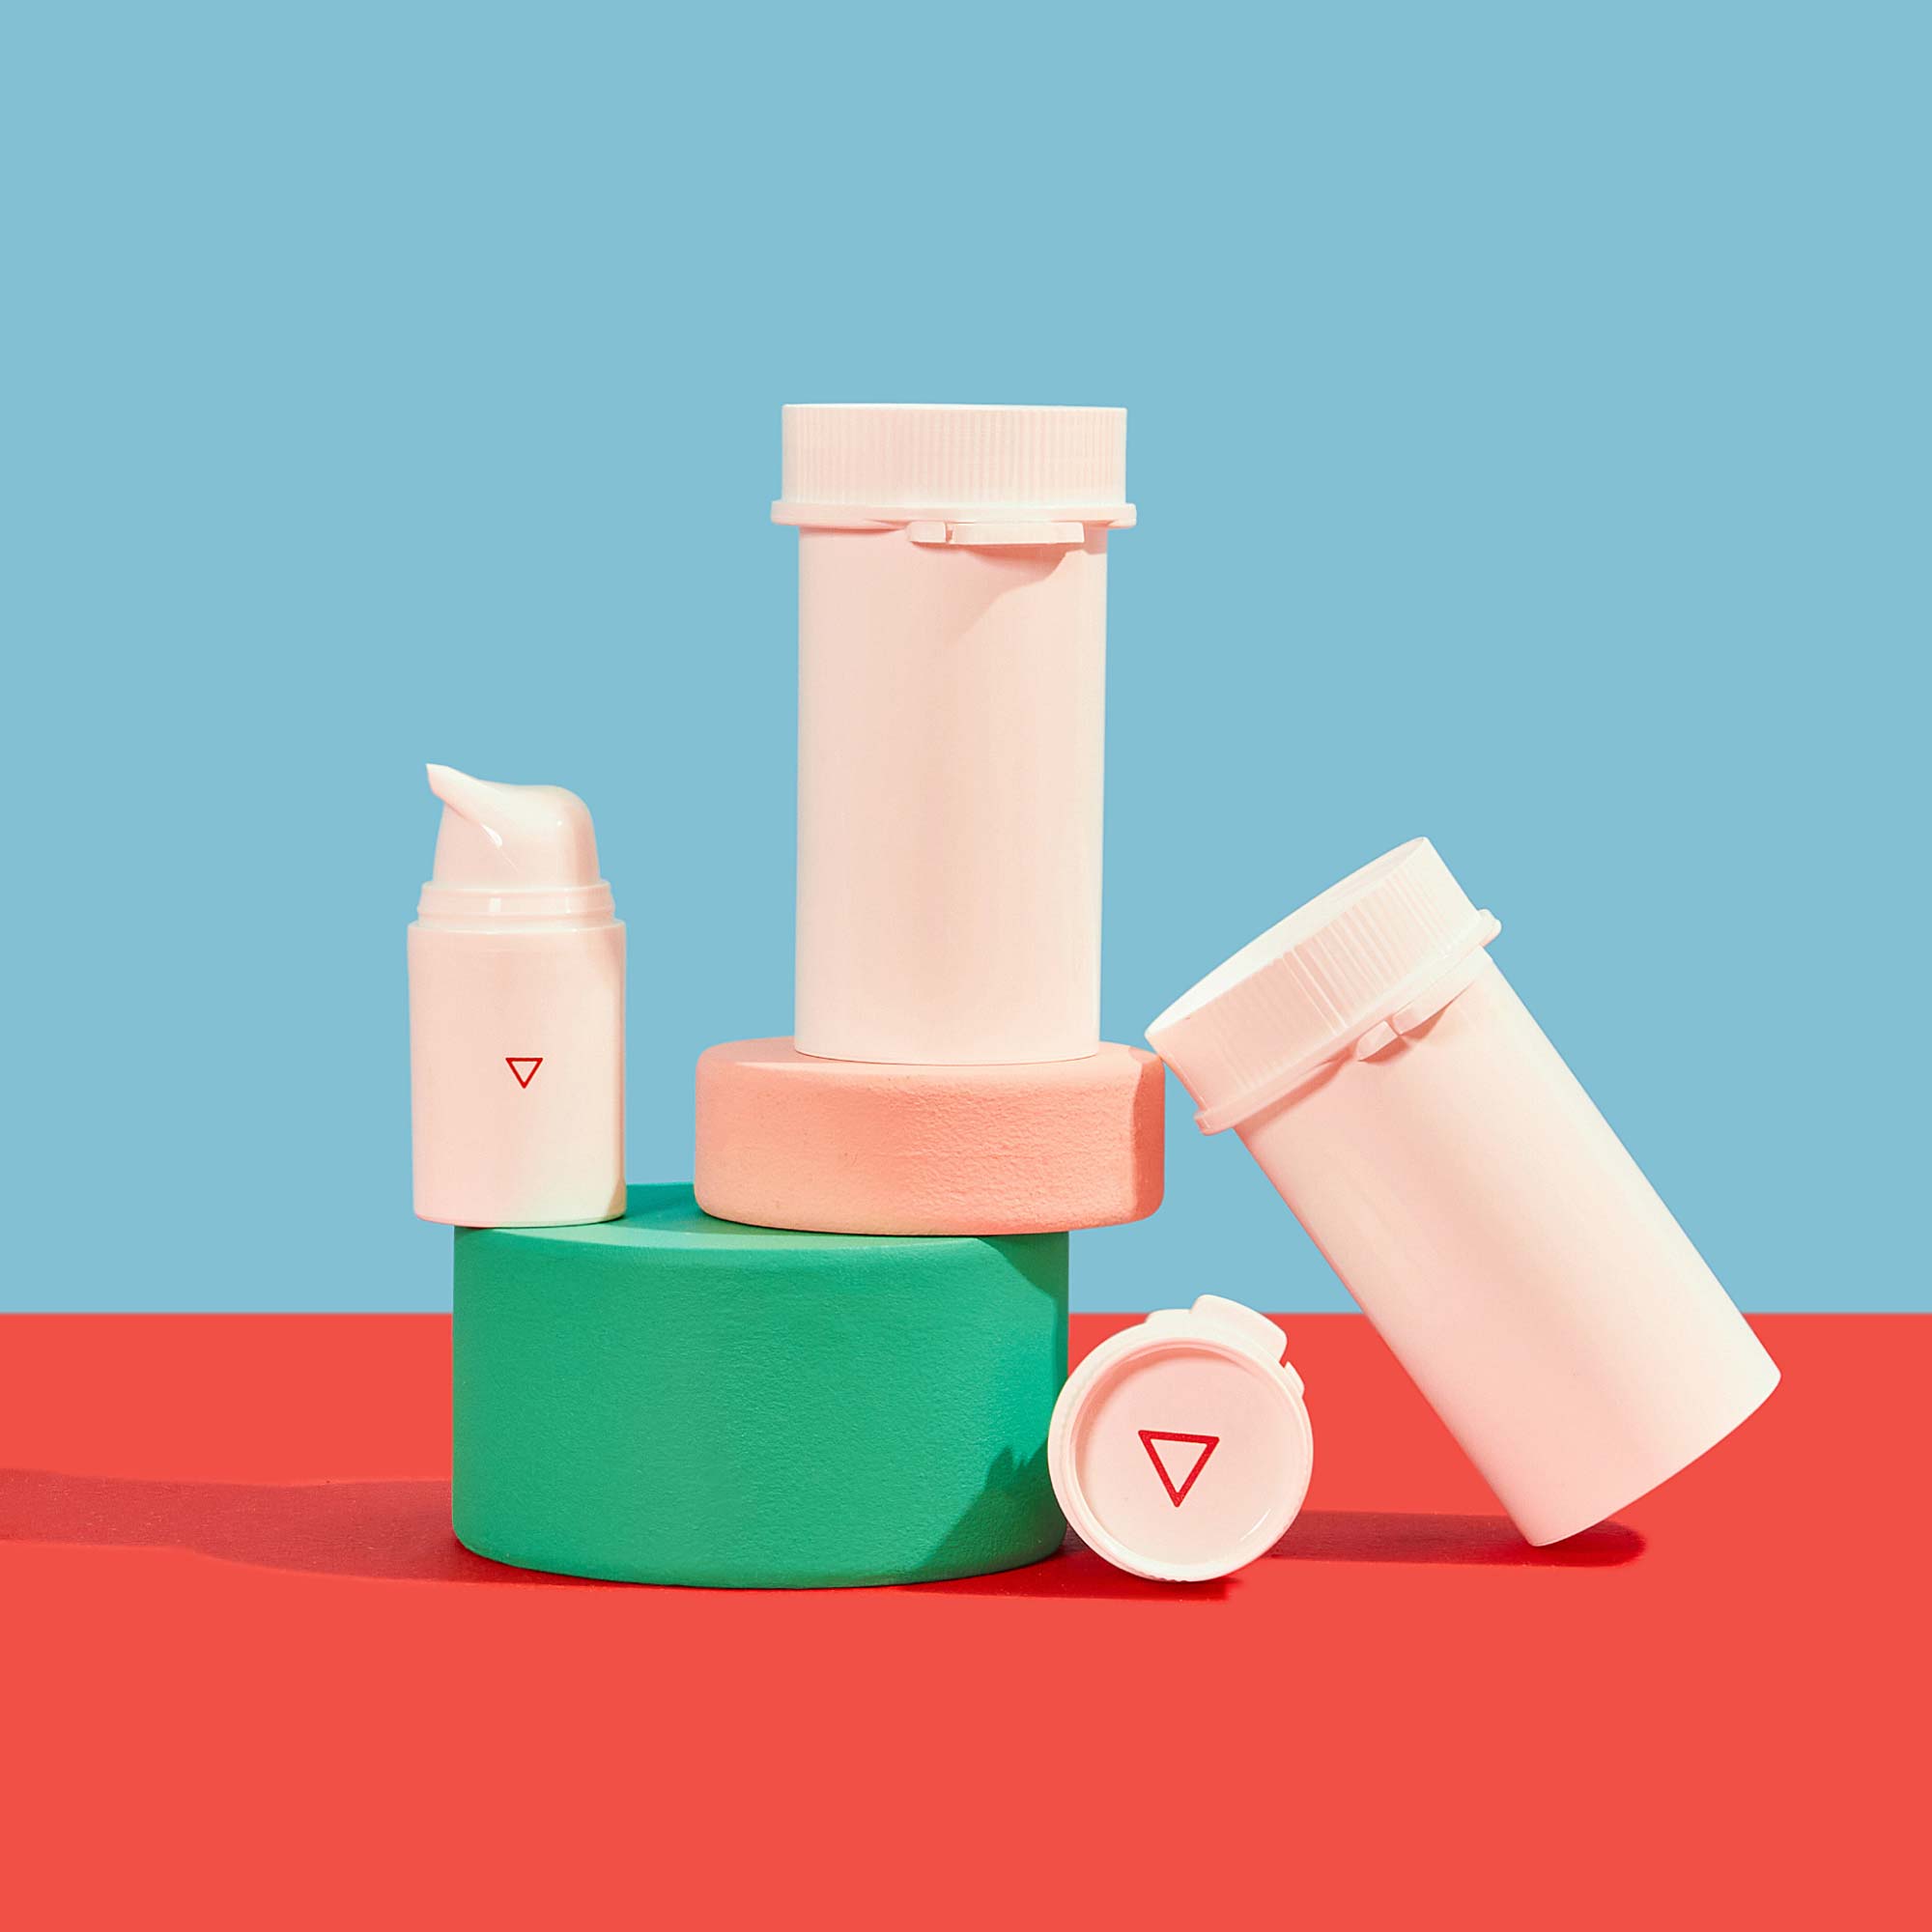 Wisp pill vials and pump bottles balanced on colorful abstract shapes on a red surface with a light blue background